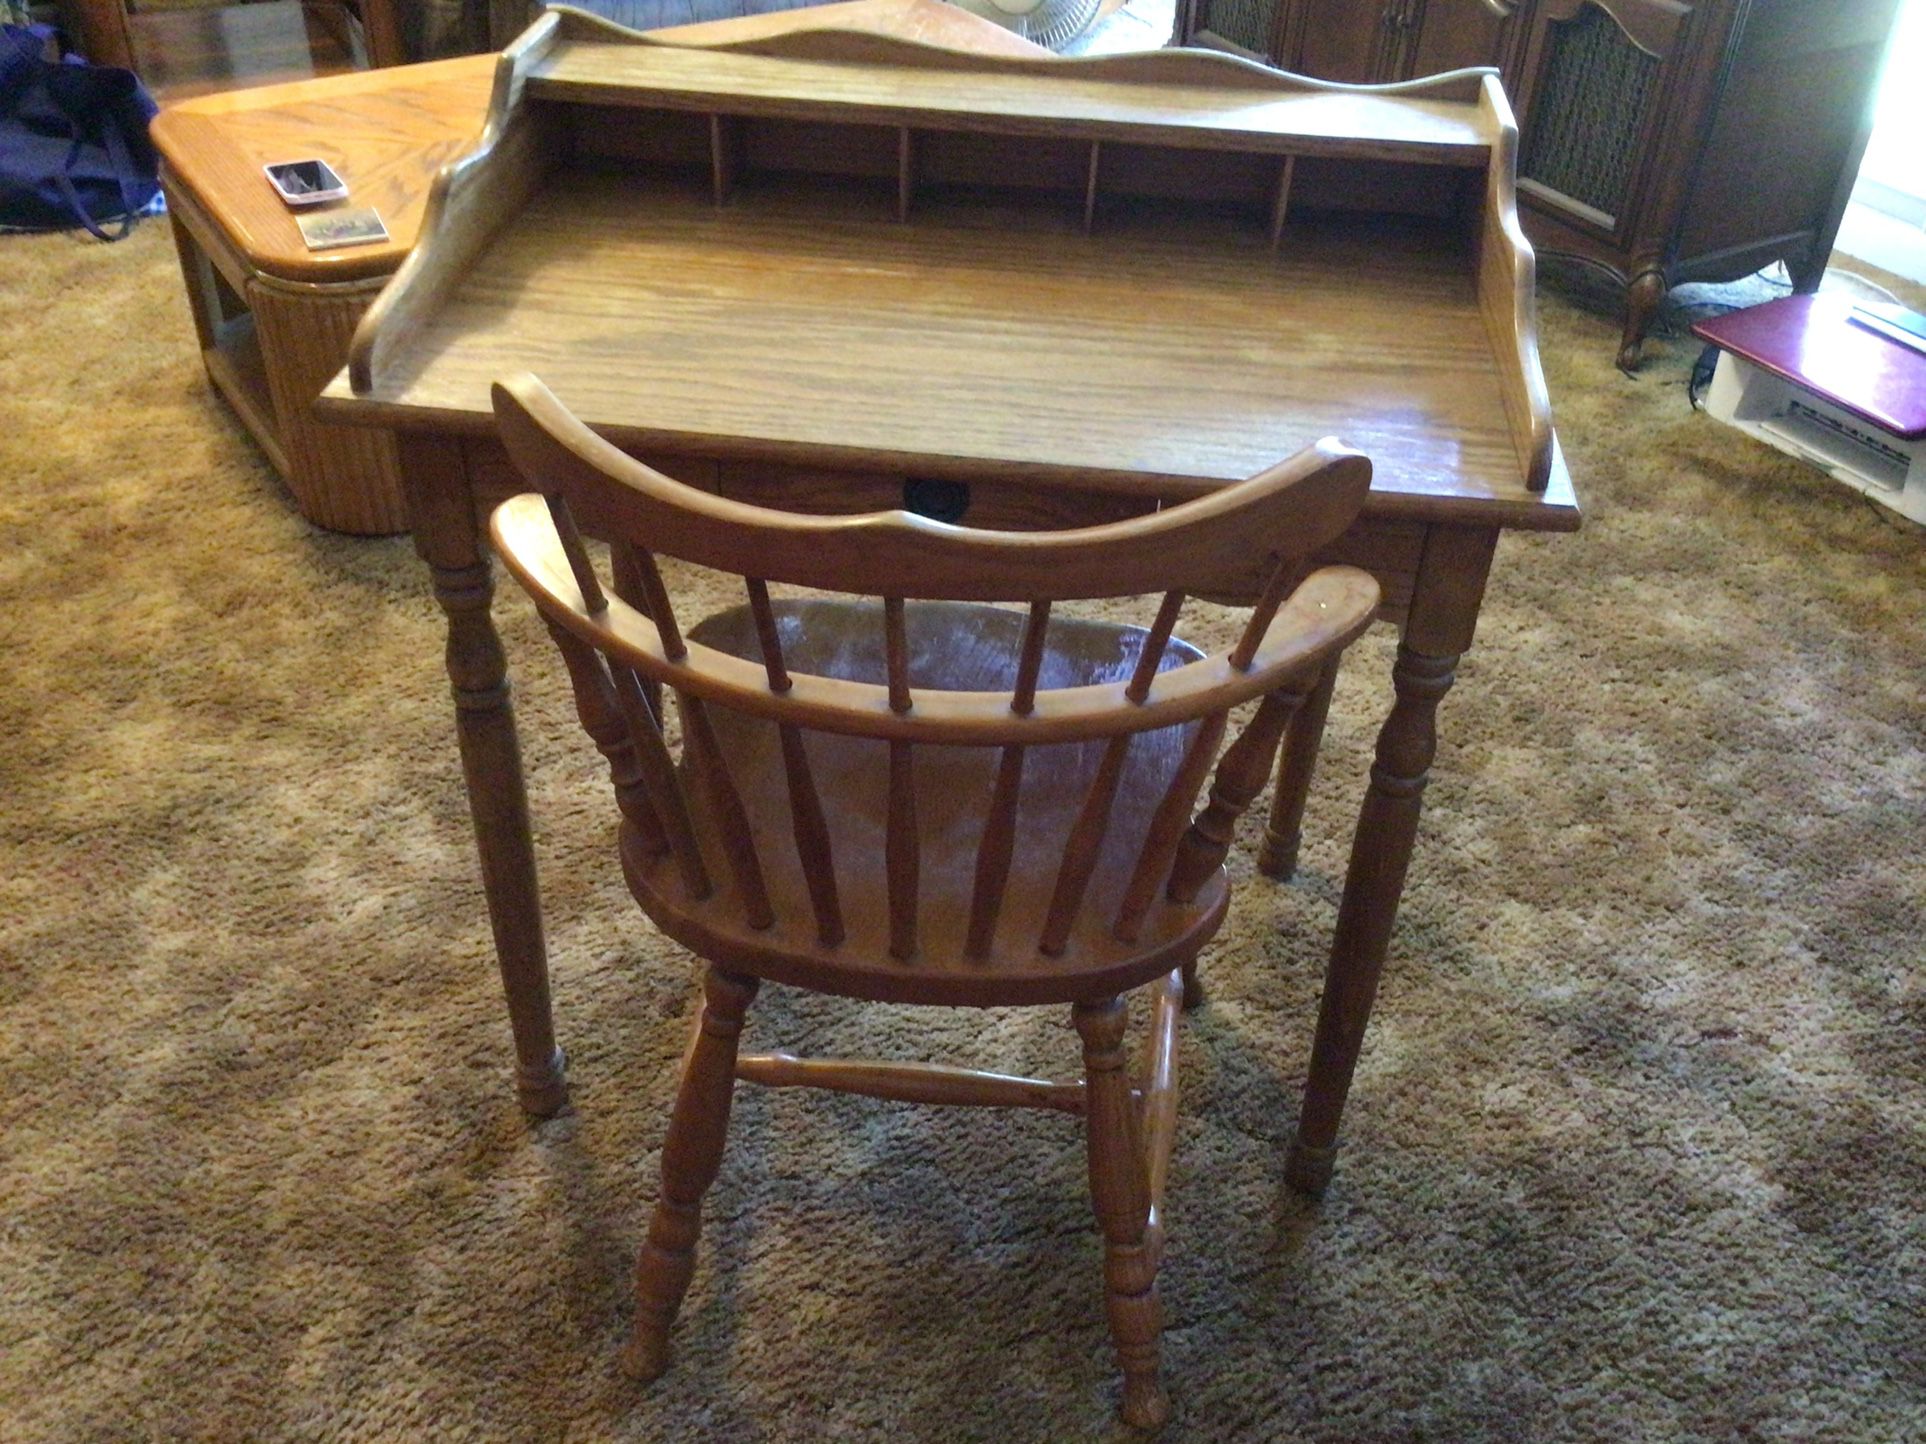 Beautiful, vintage/antique two-piece desk for younger children